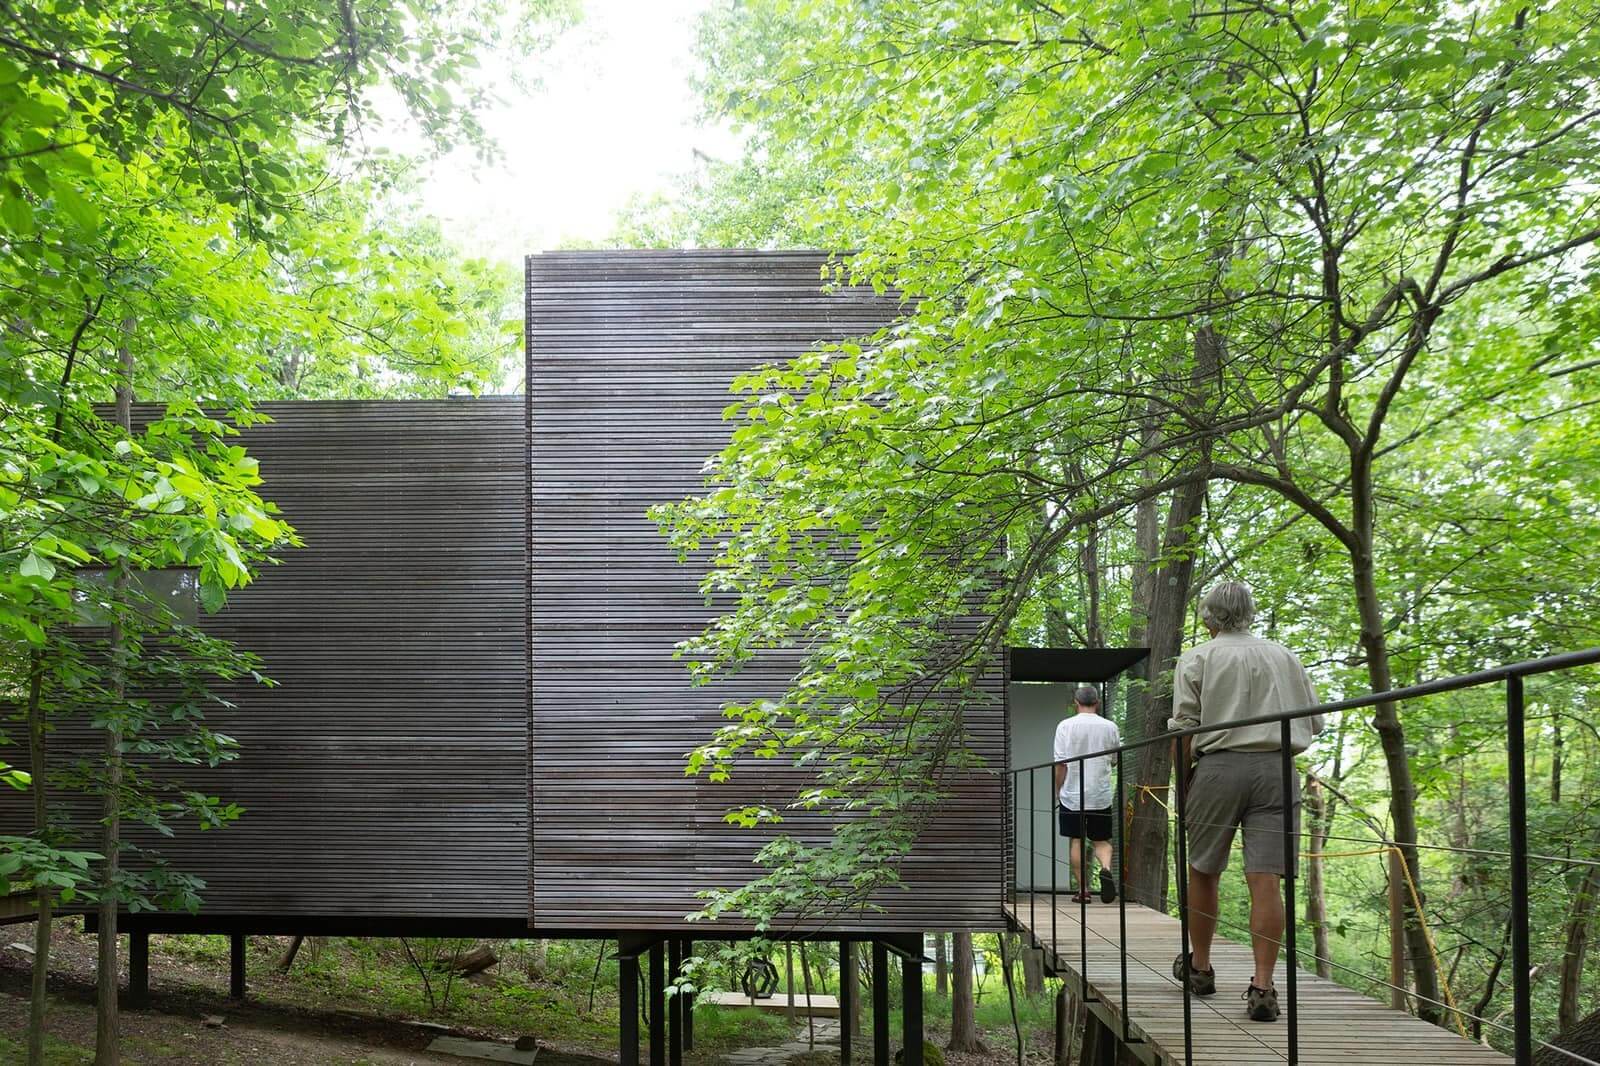 a stiled pavilion structure in the woods